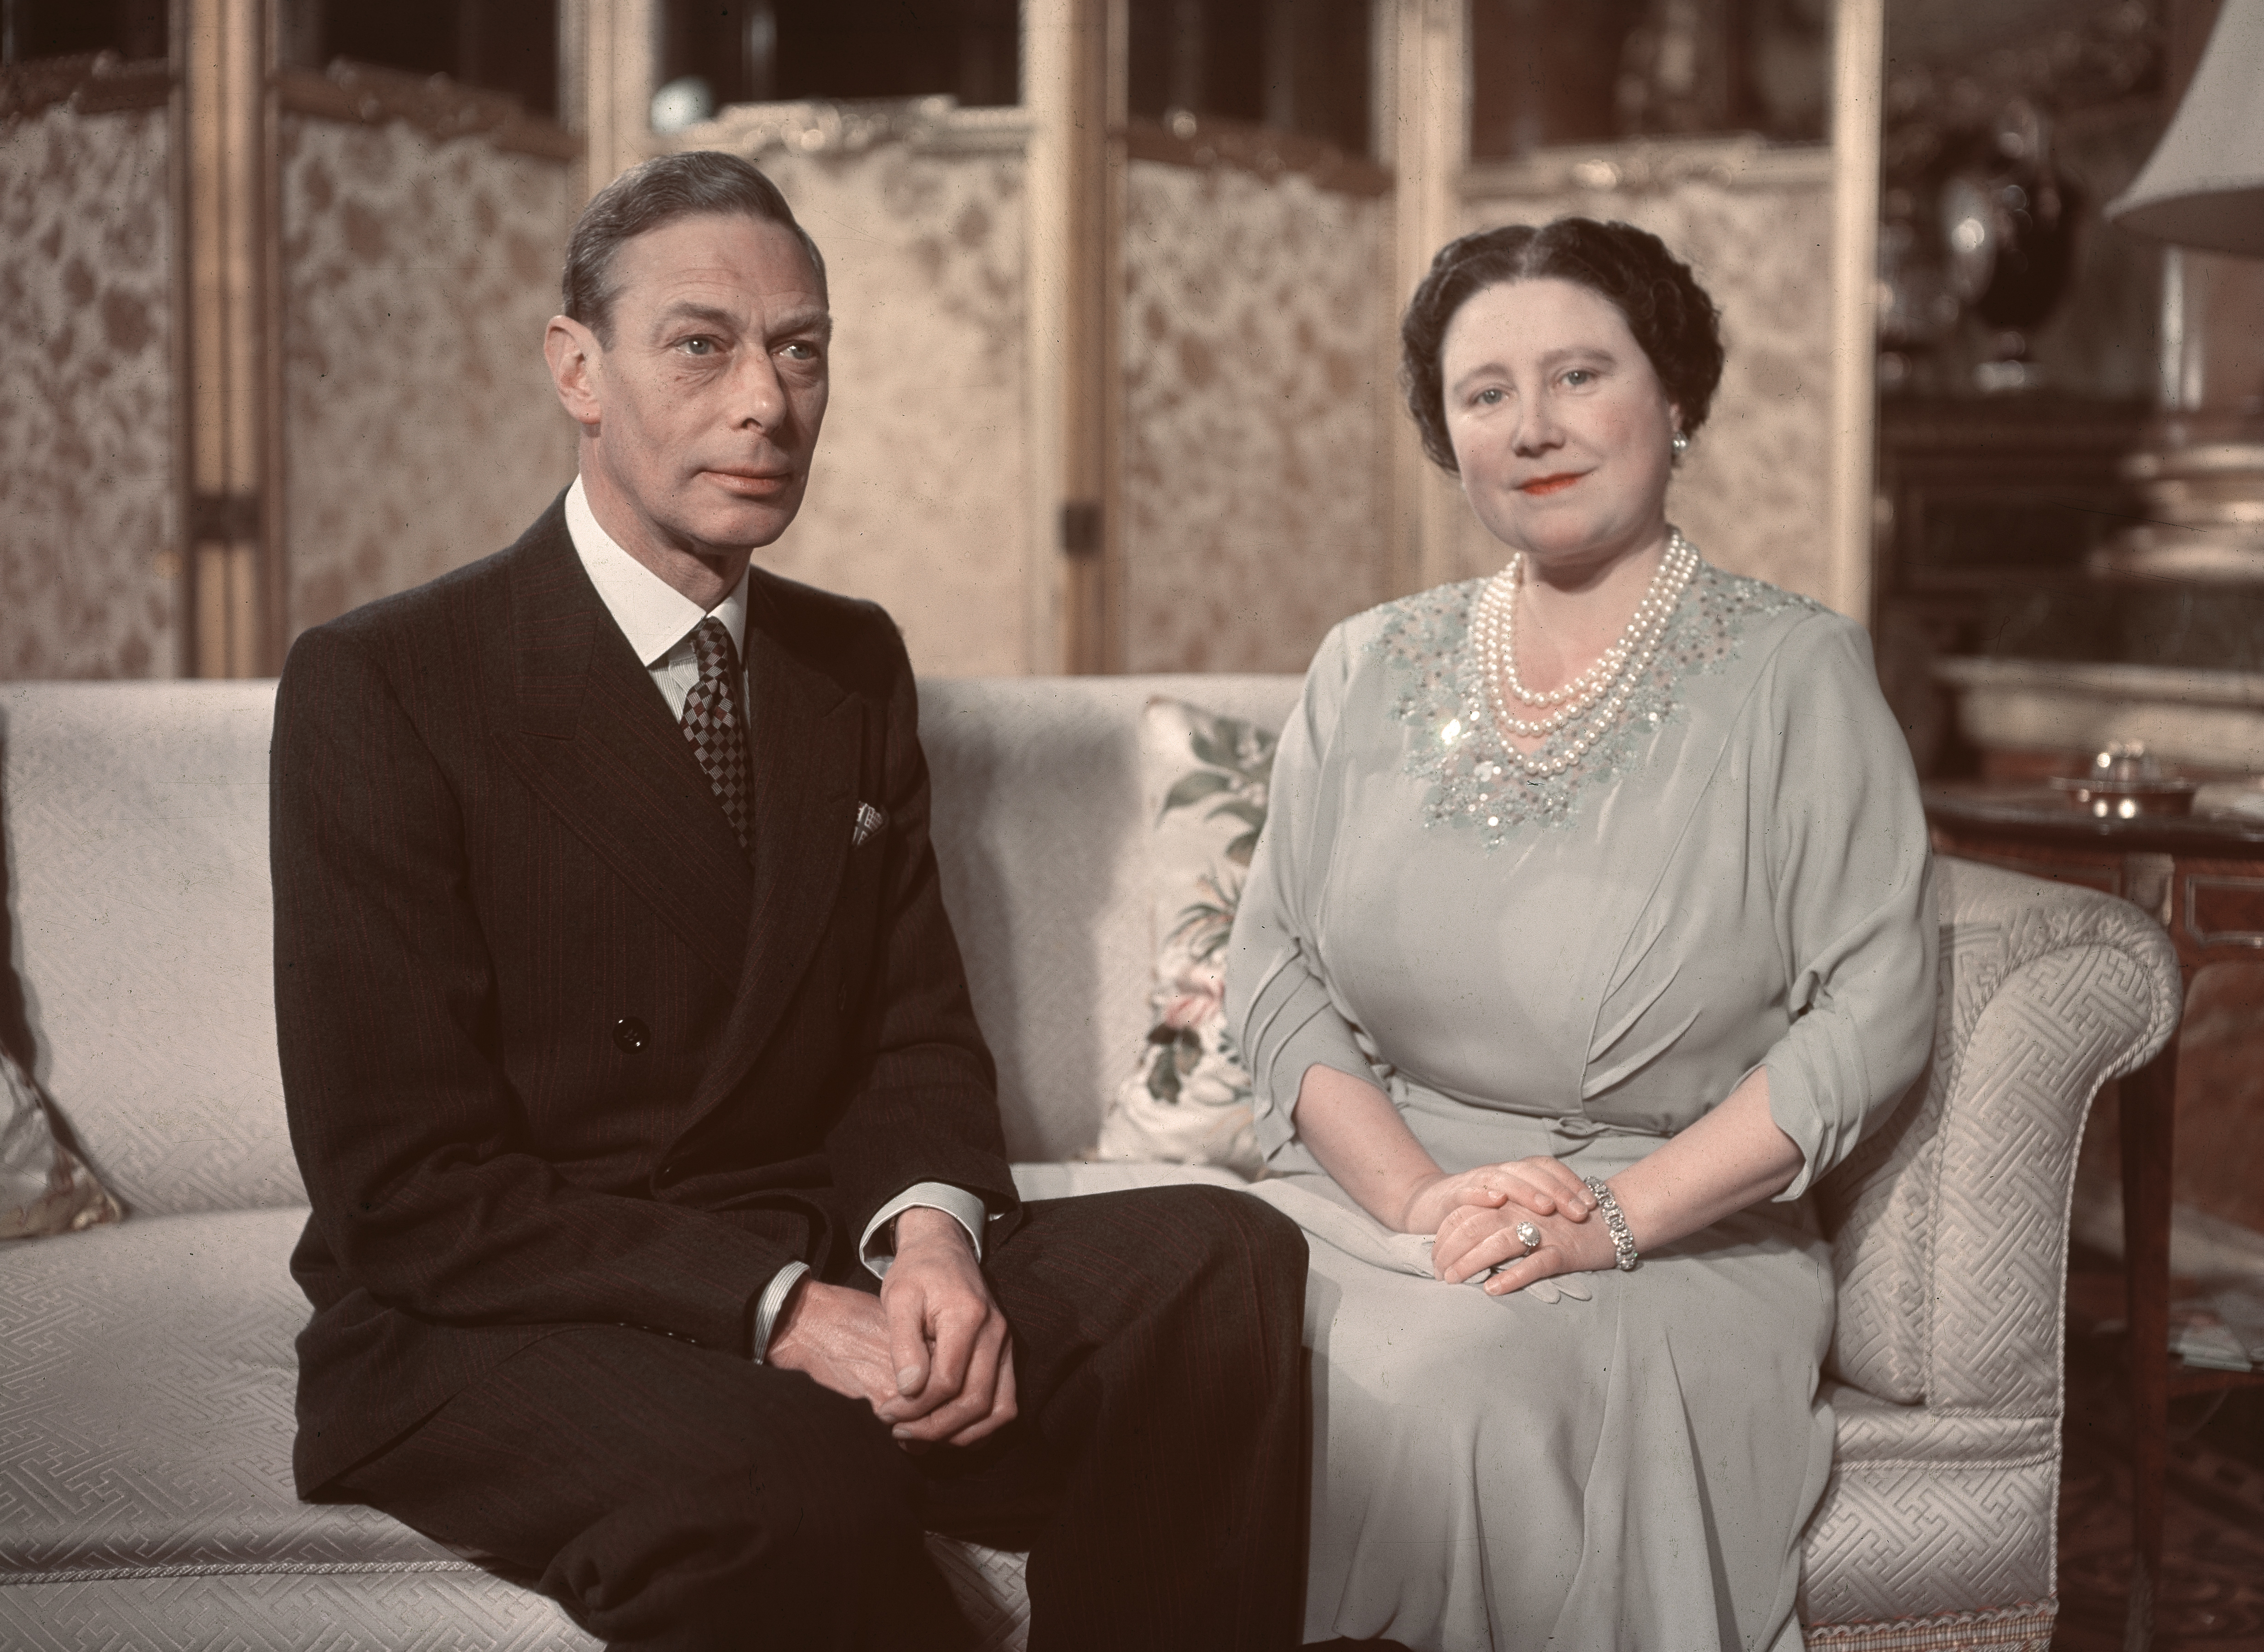 King George VI and Her Majesty Queen Elizabeth at Buckingham Palace on January 1, 1942 in London. | Source: Getty Images